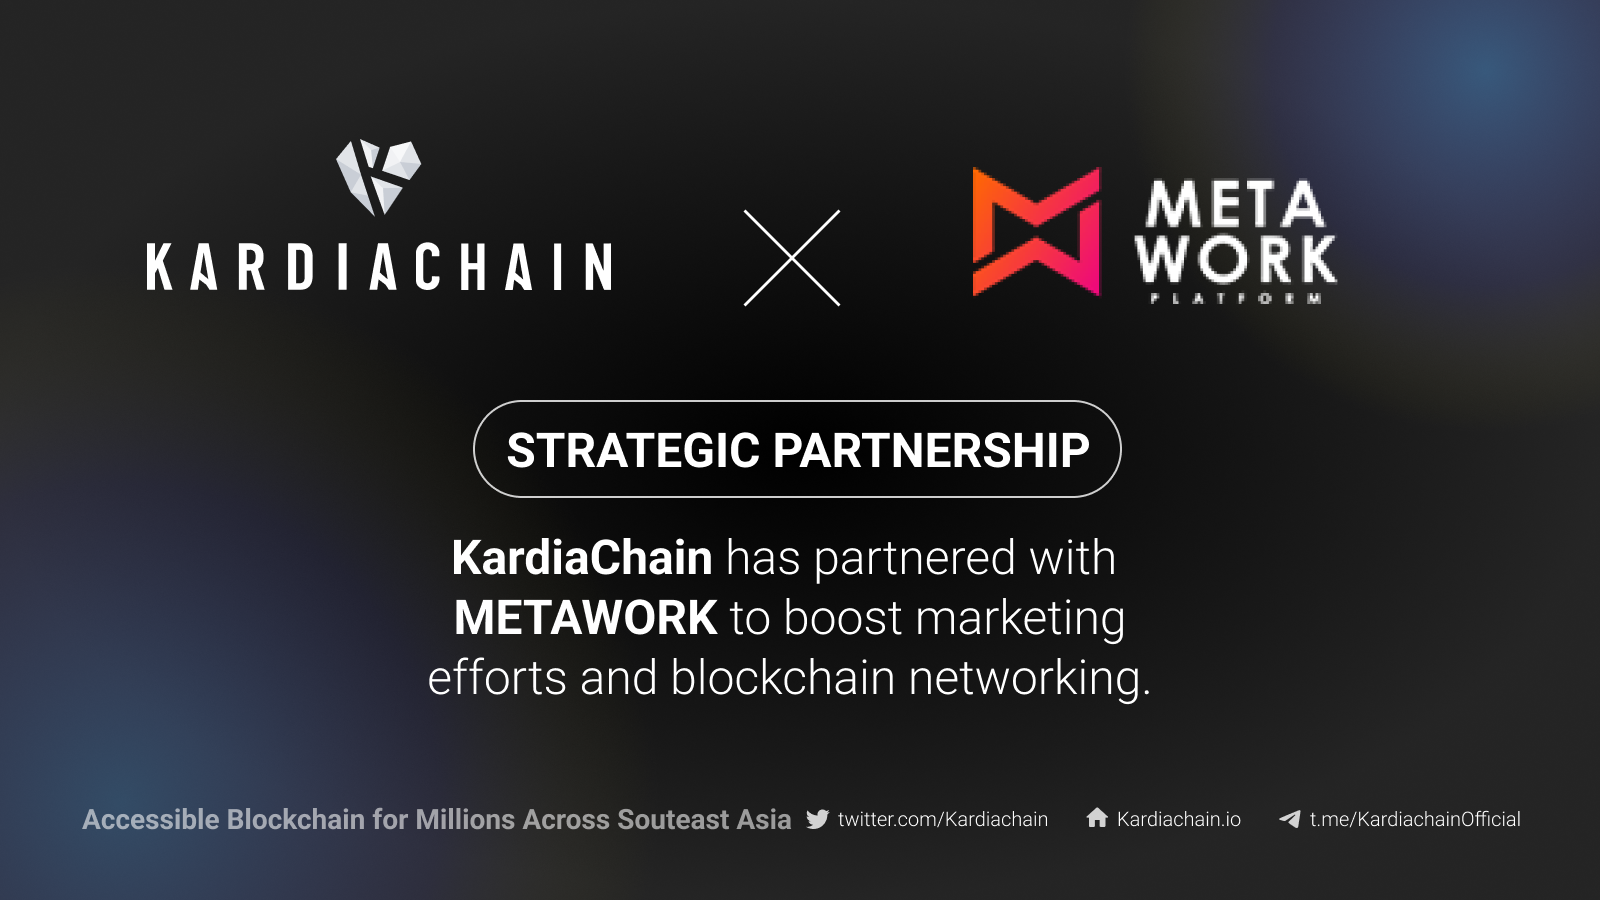 KardiaChain has partnered with METAWORK to Boost Marketing Efforts and Blockchain Networking